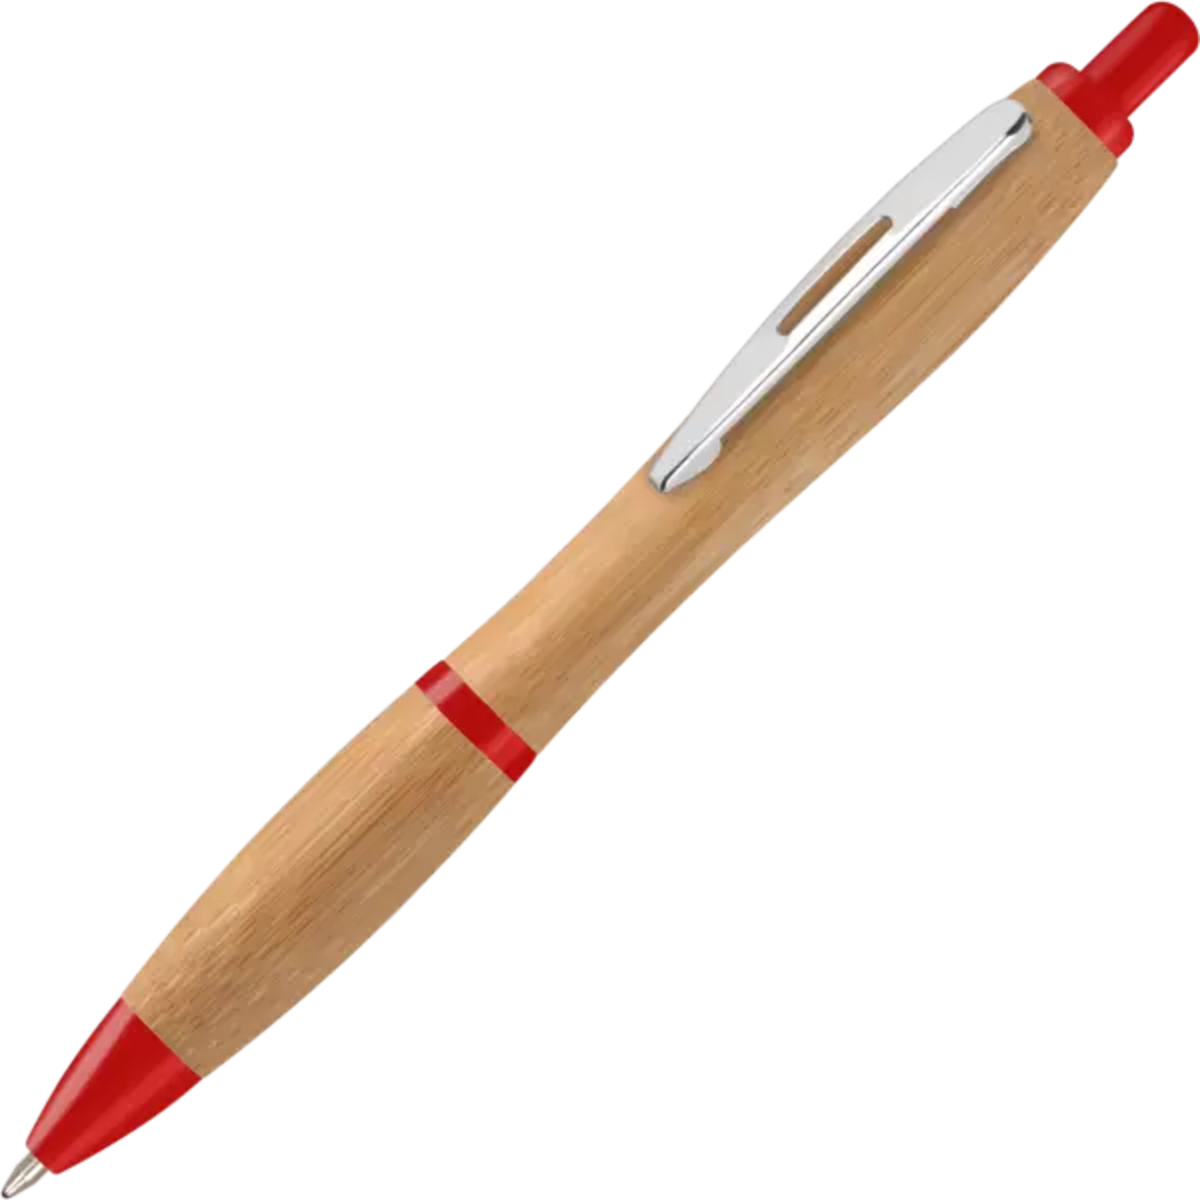 Curvy Sustainable Bamboo Pen Red trim